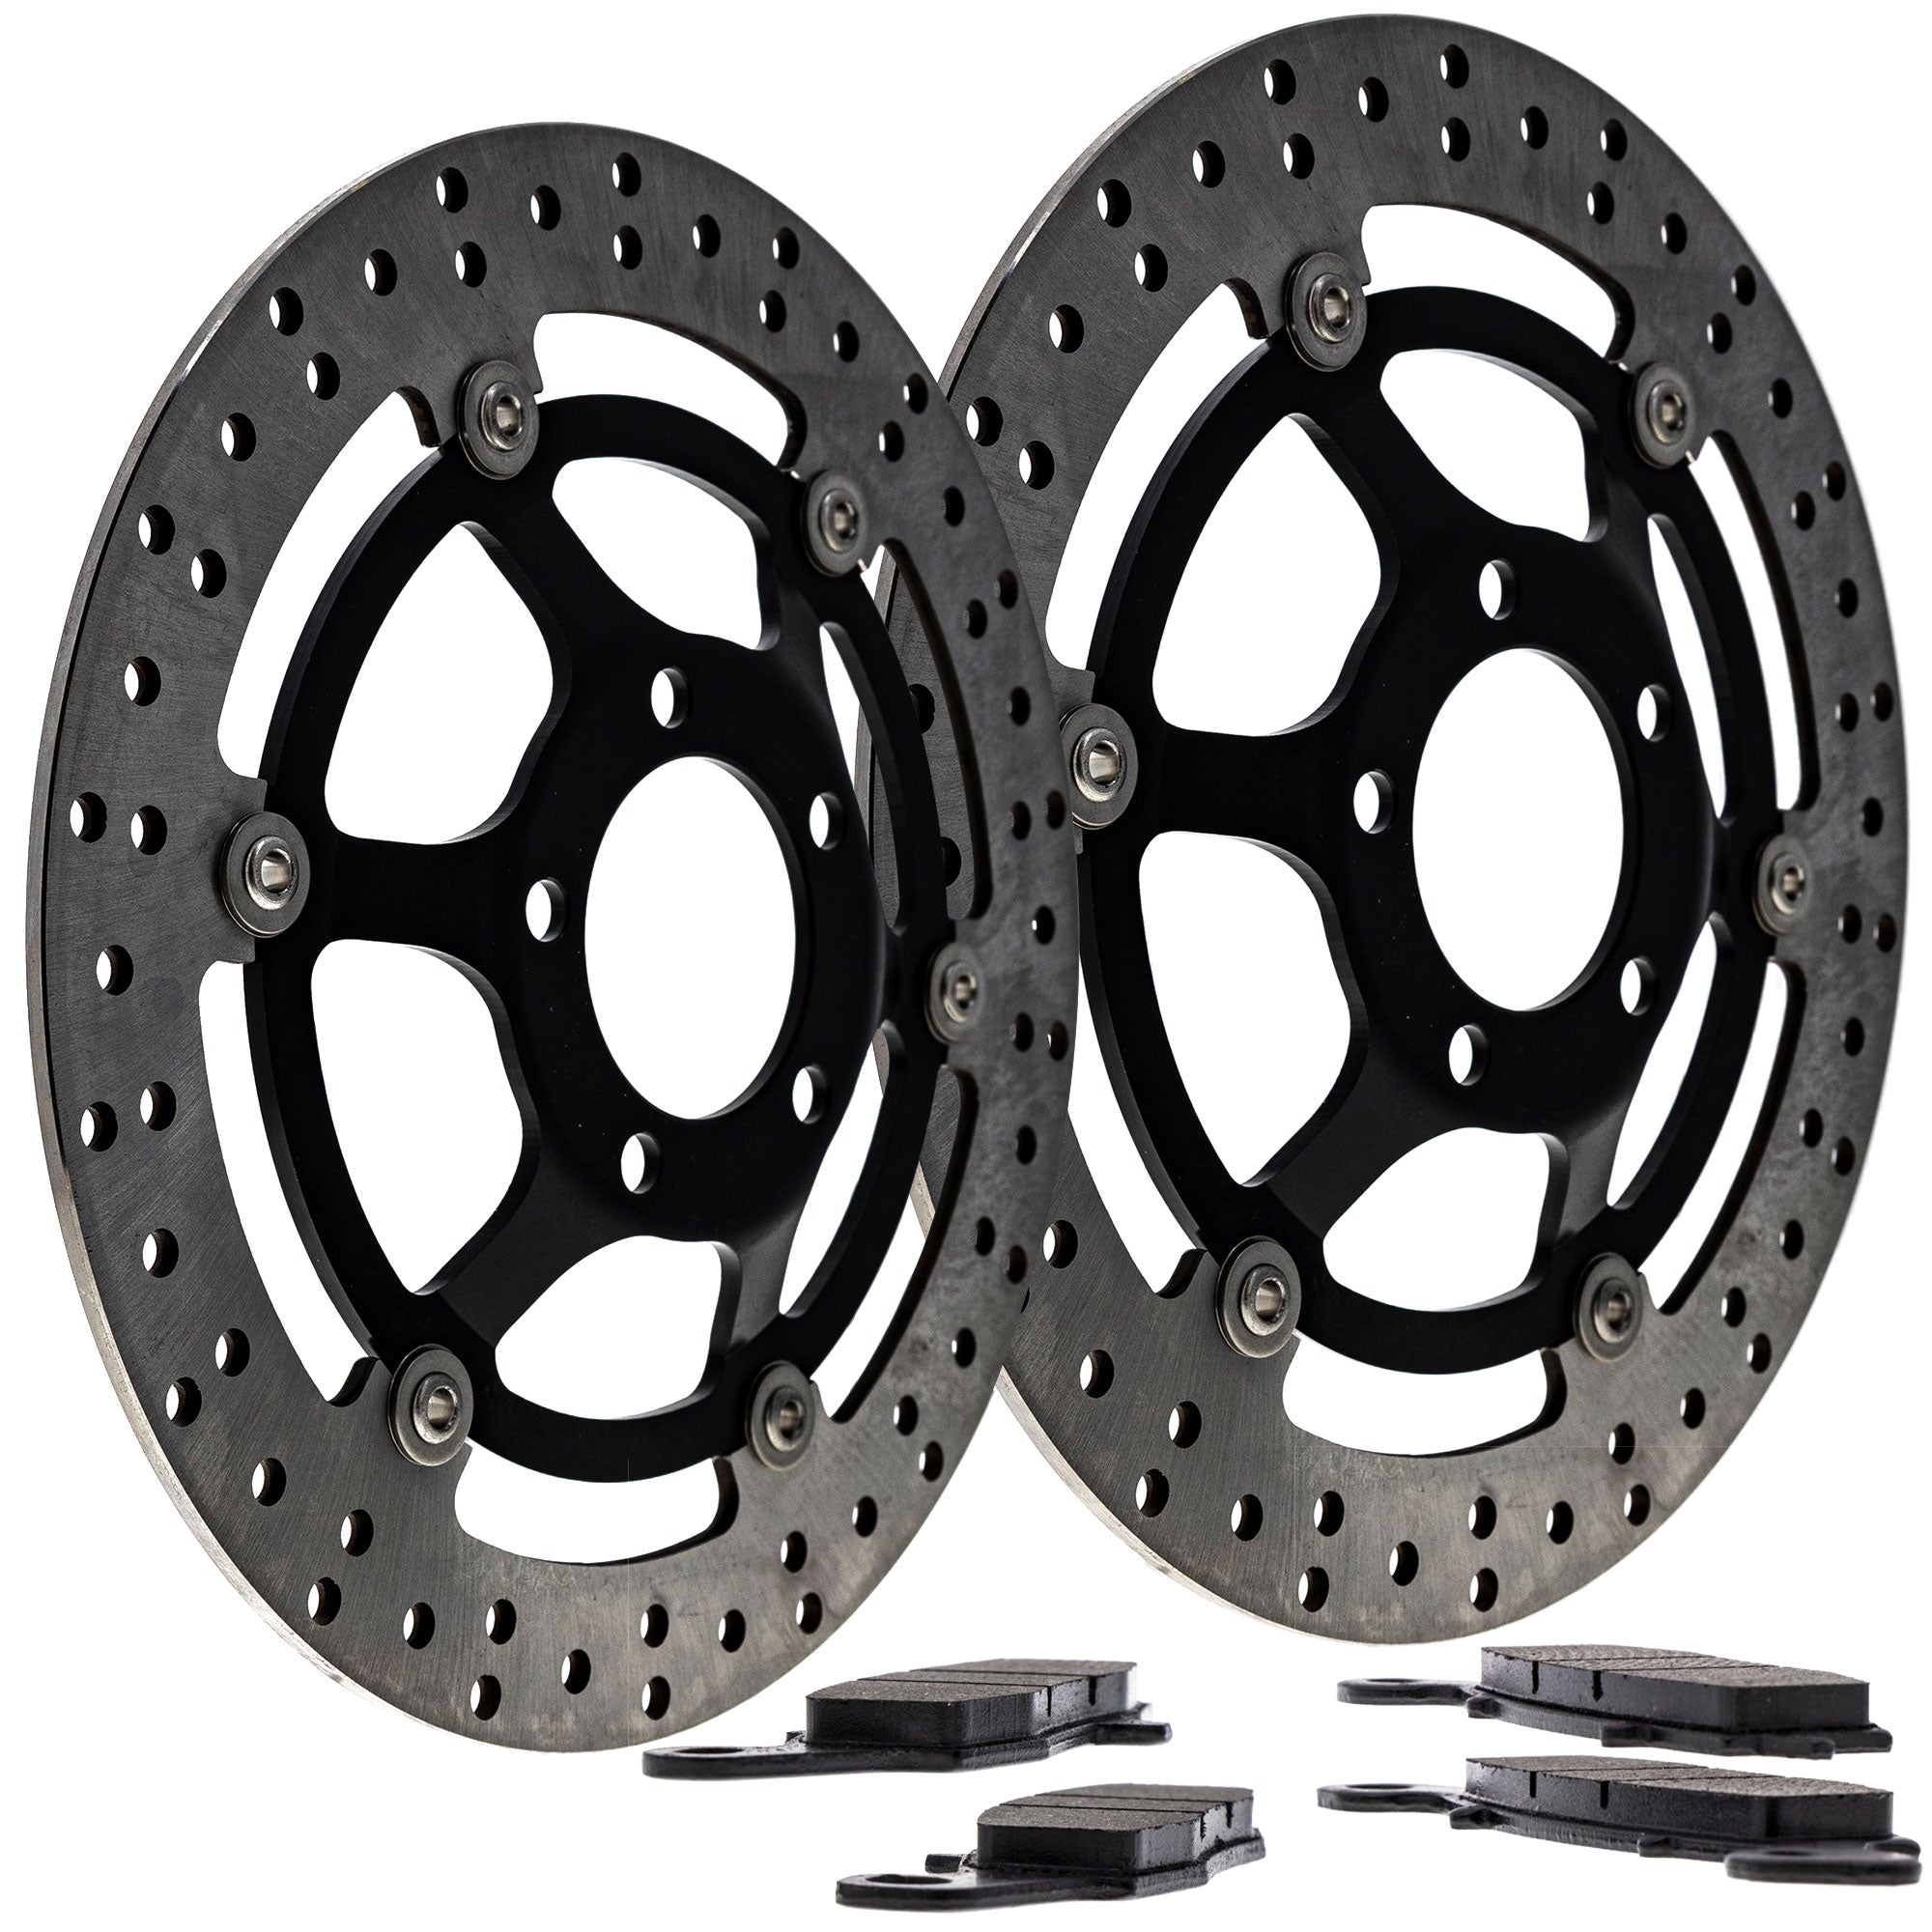 Complete Front or Rear Pad and Rotor Set for zOTHER Suzuki Kawasaki BMW SV650S SV650 NICHE MK1006724